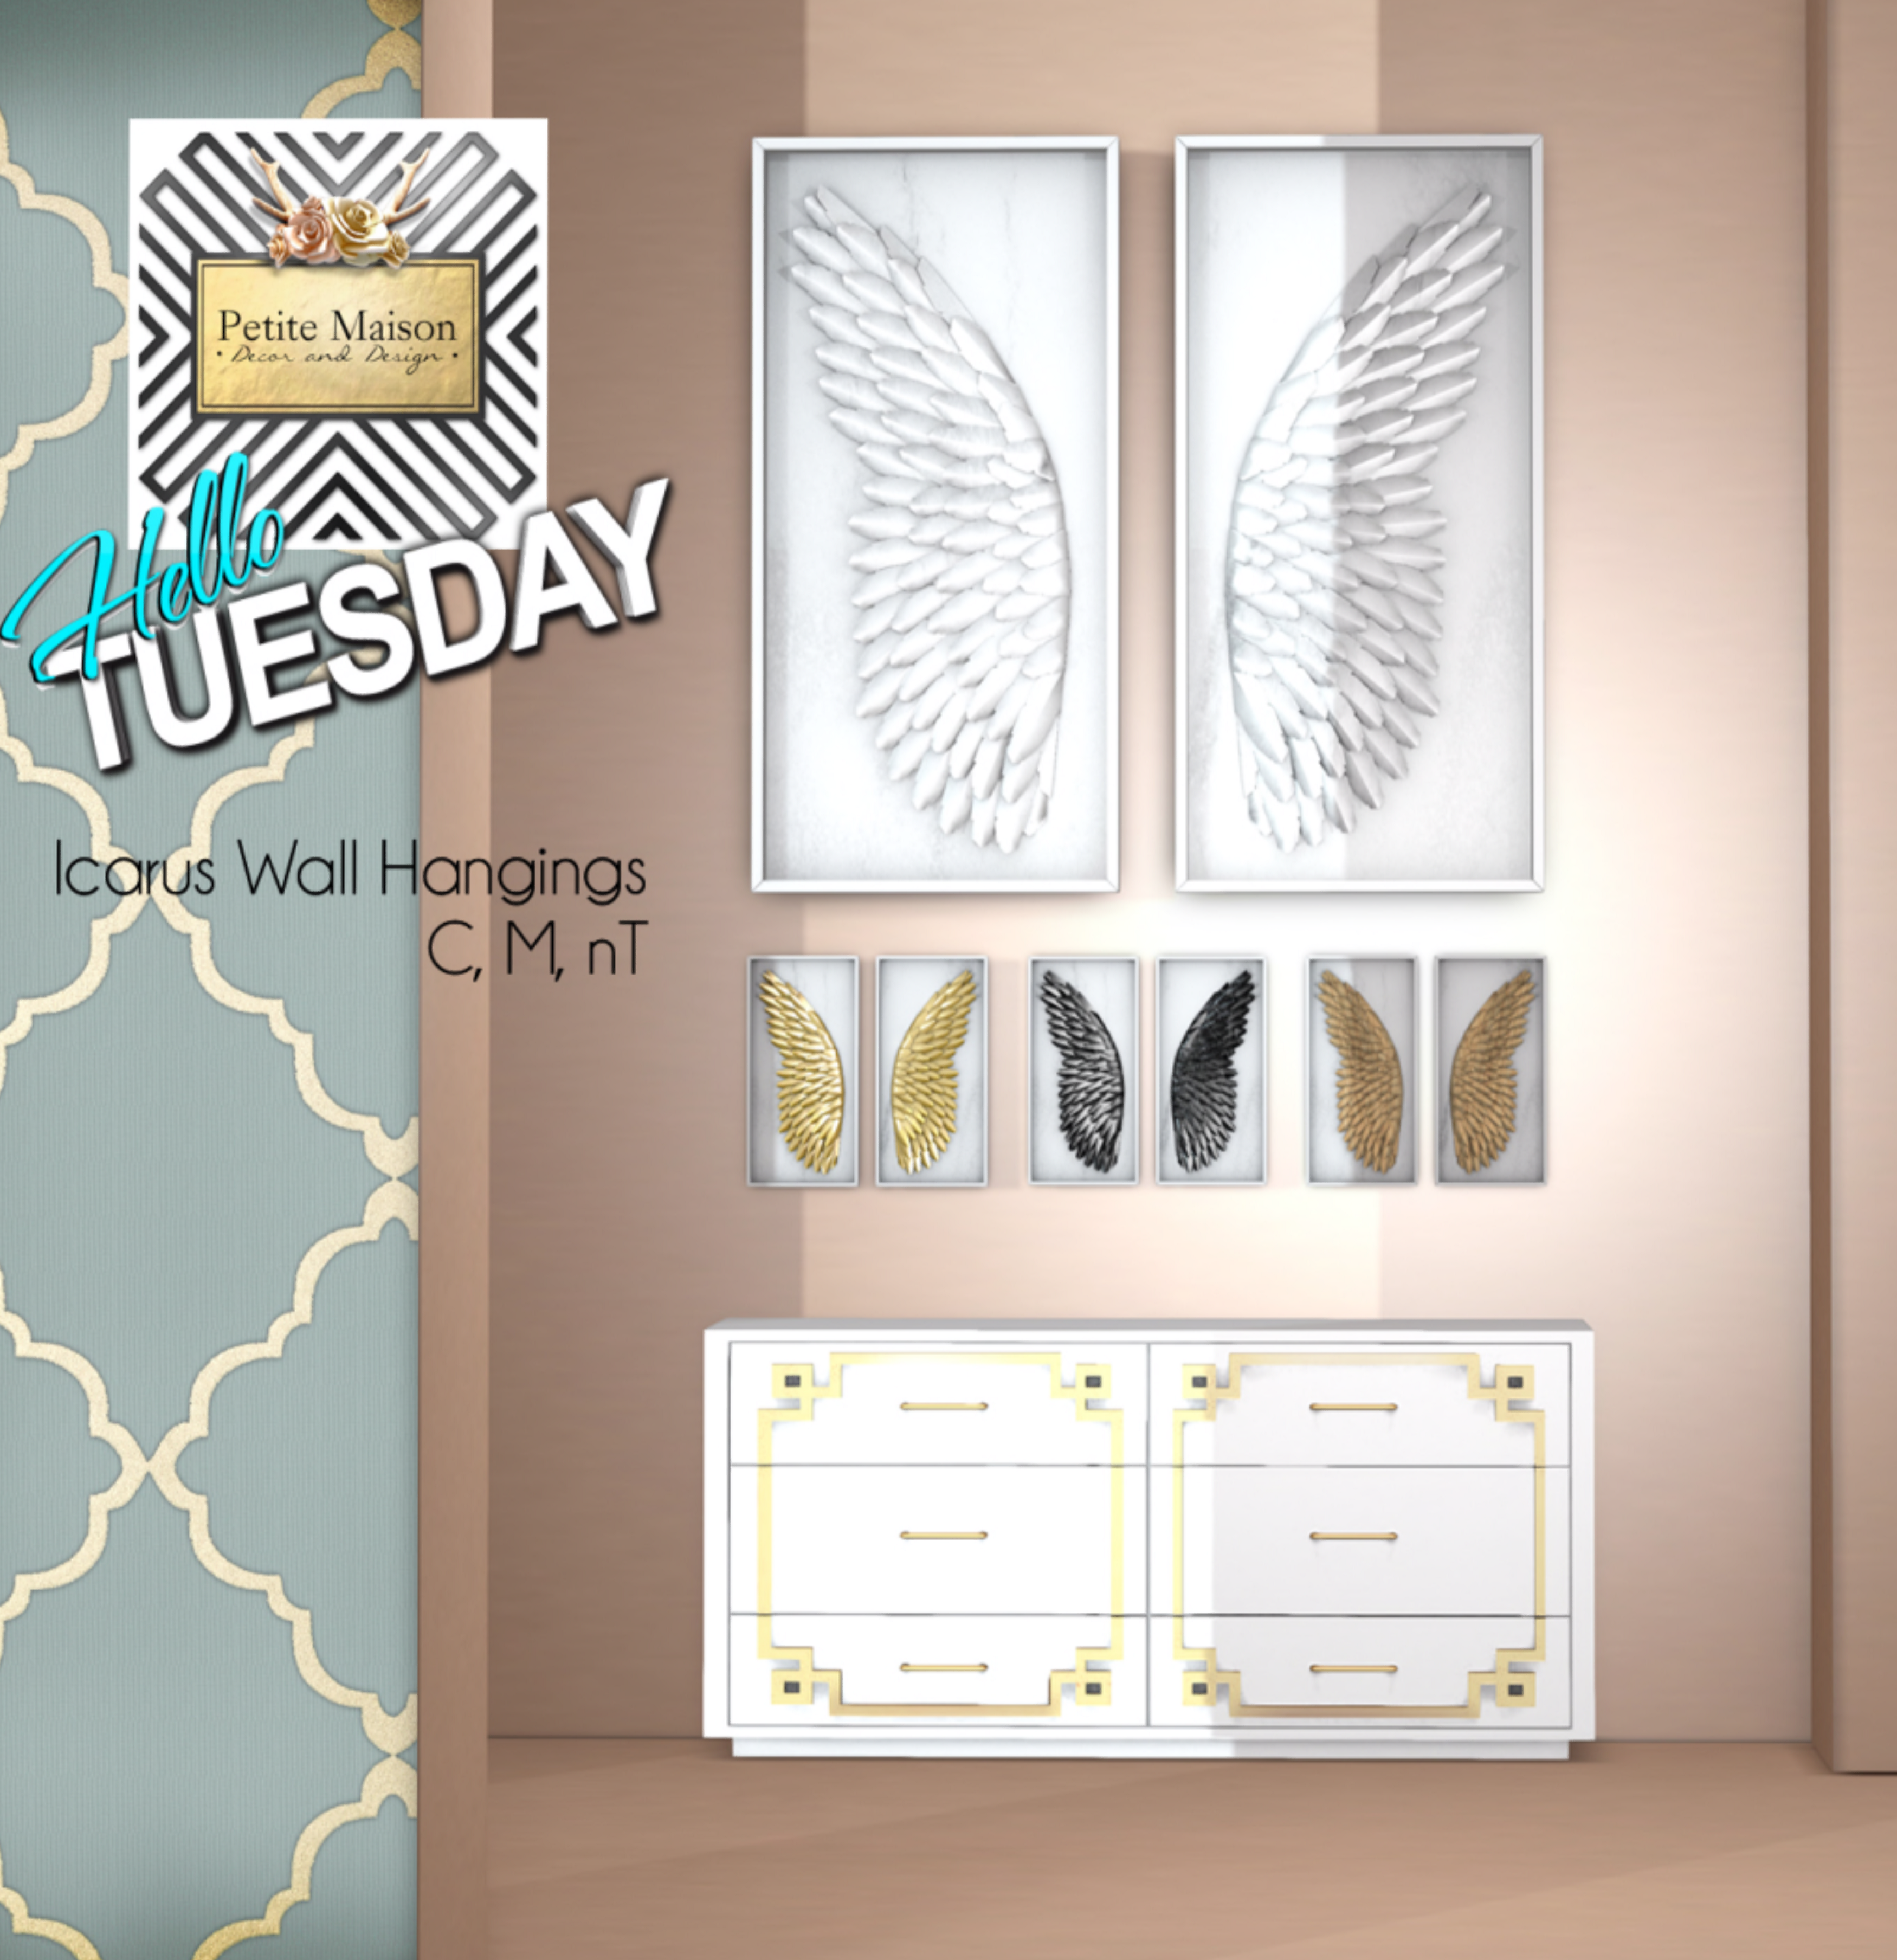 Petite Maison – Icarus Wall Hangings & Athena Consoles